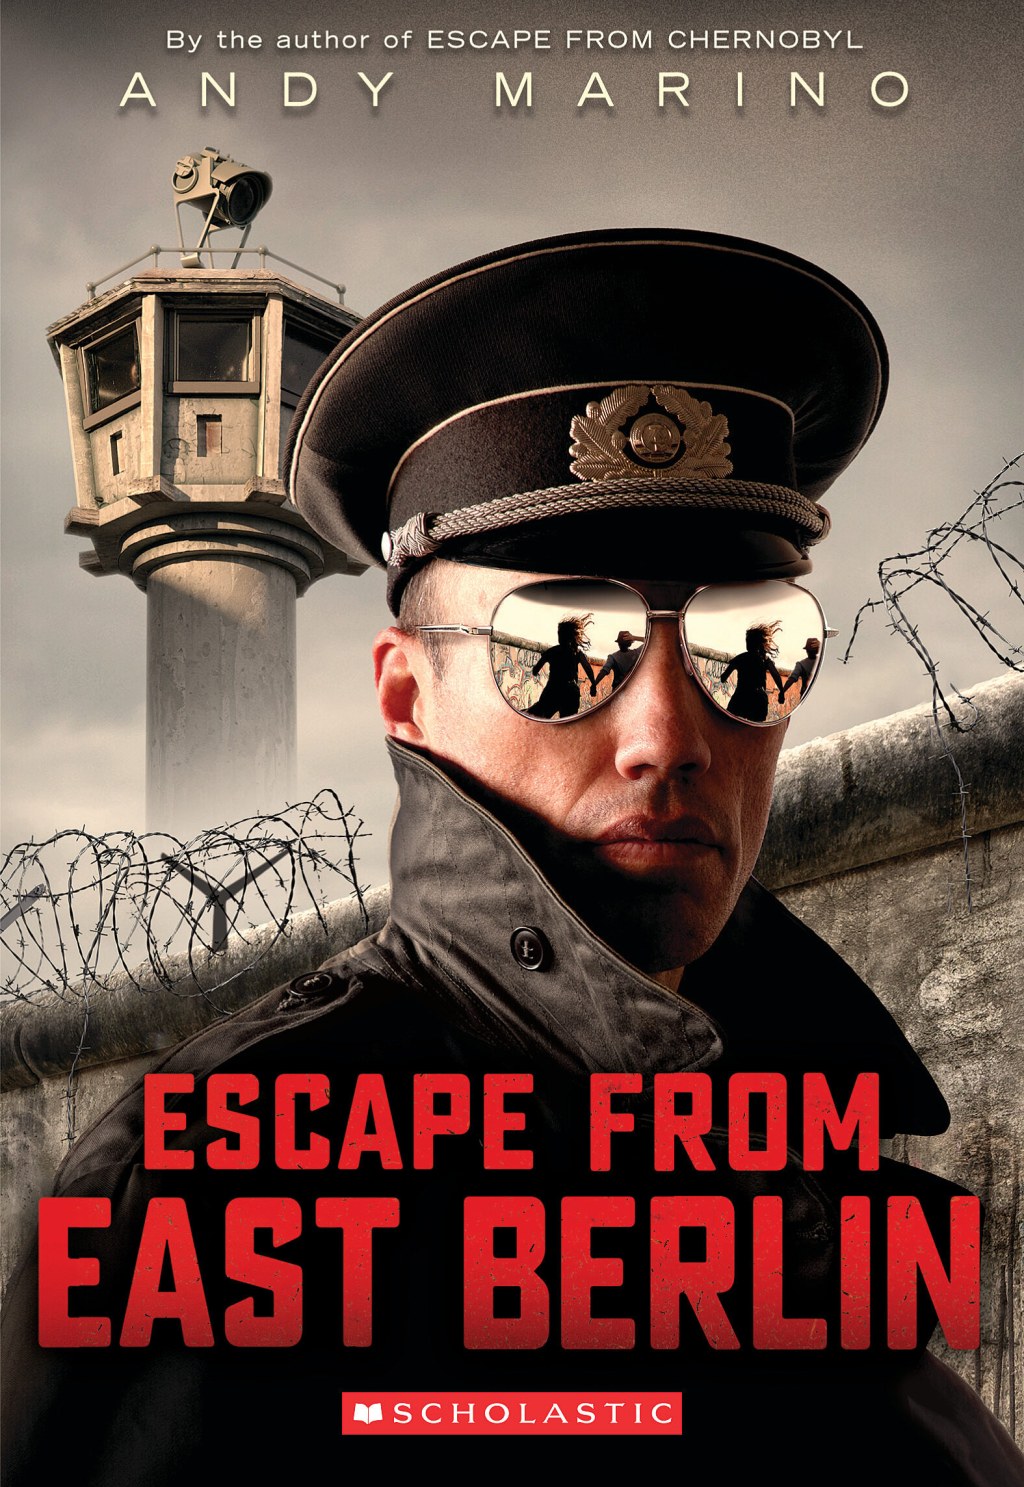 Picture of: Escape from East Berlin by Andy Marino  Goodreads